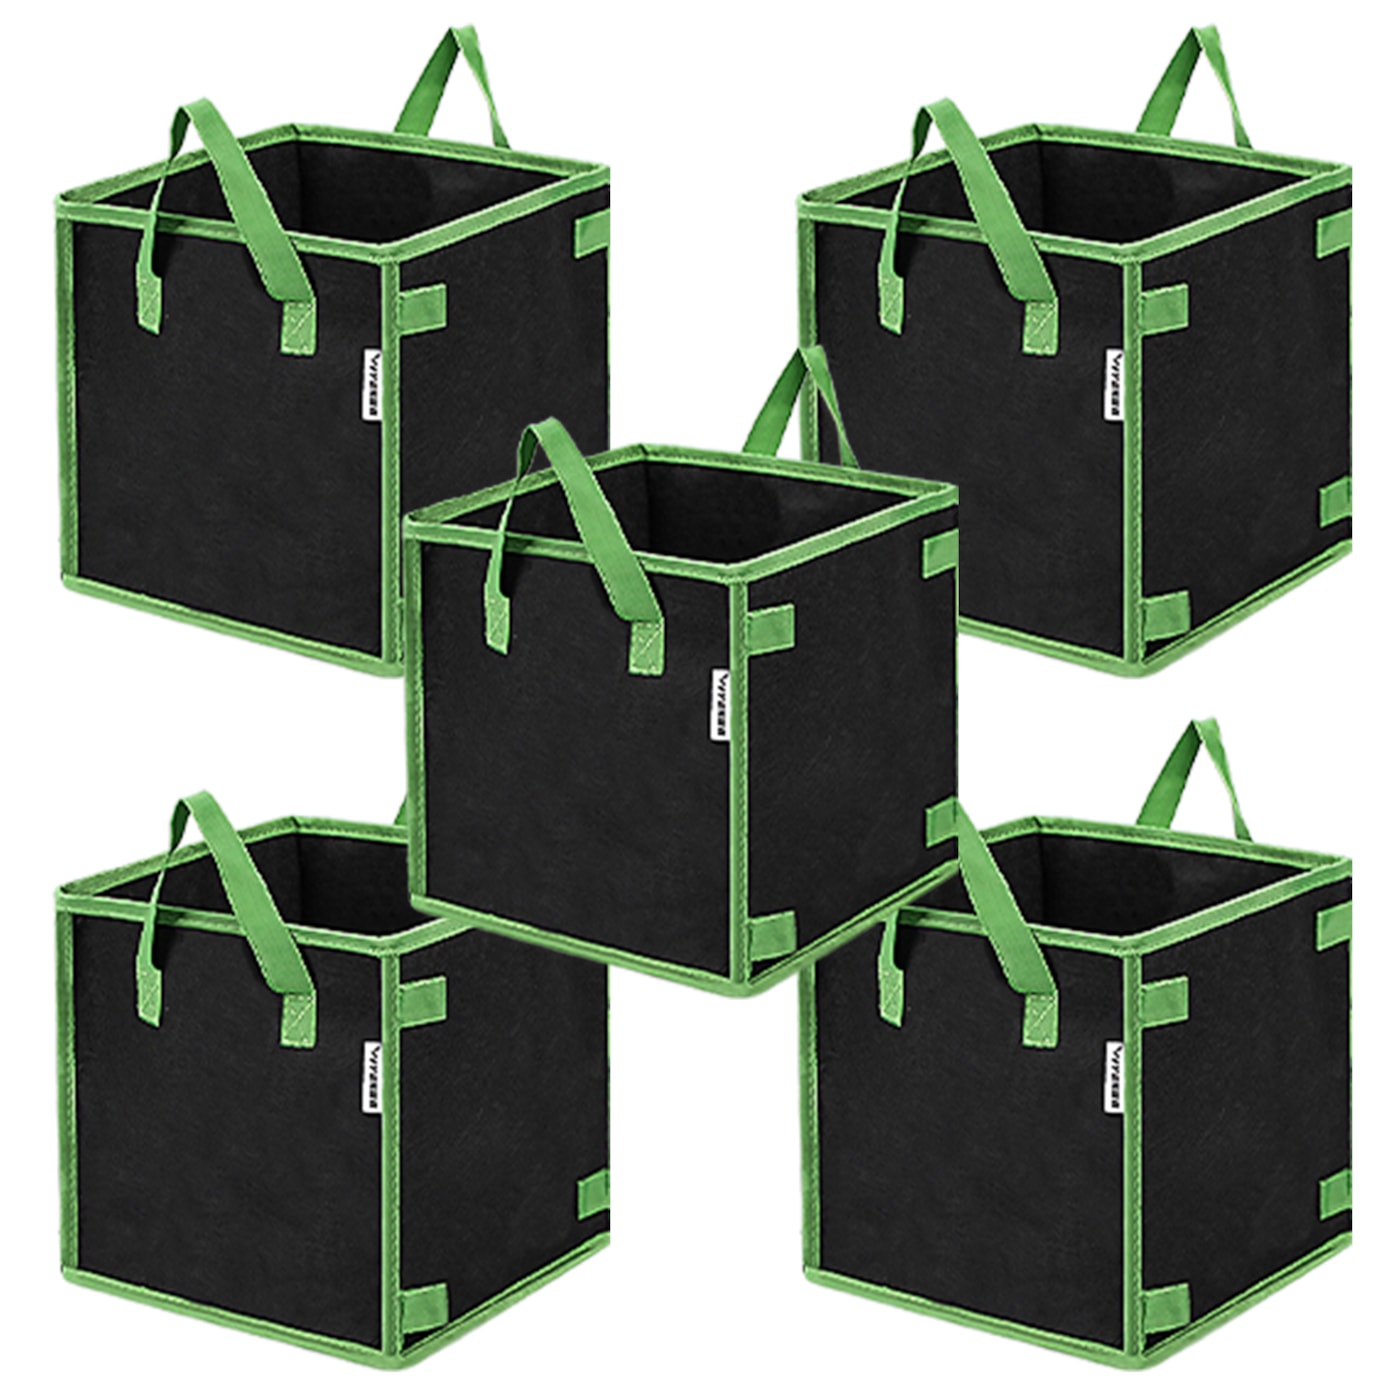 VIVOSUN 5 Gallon Square Grow Bags 5-Pack Black Thickened Nonwoven Fabric Pots with Handles